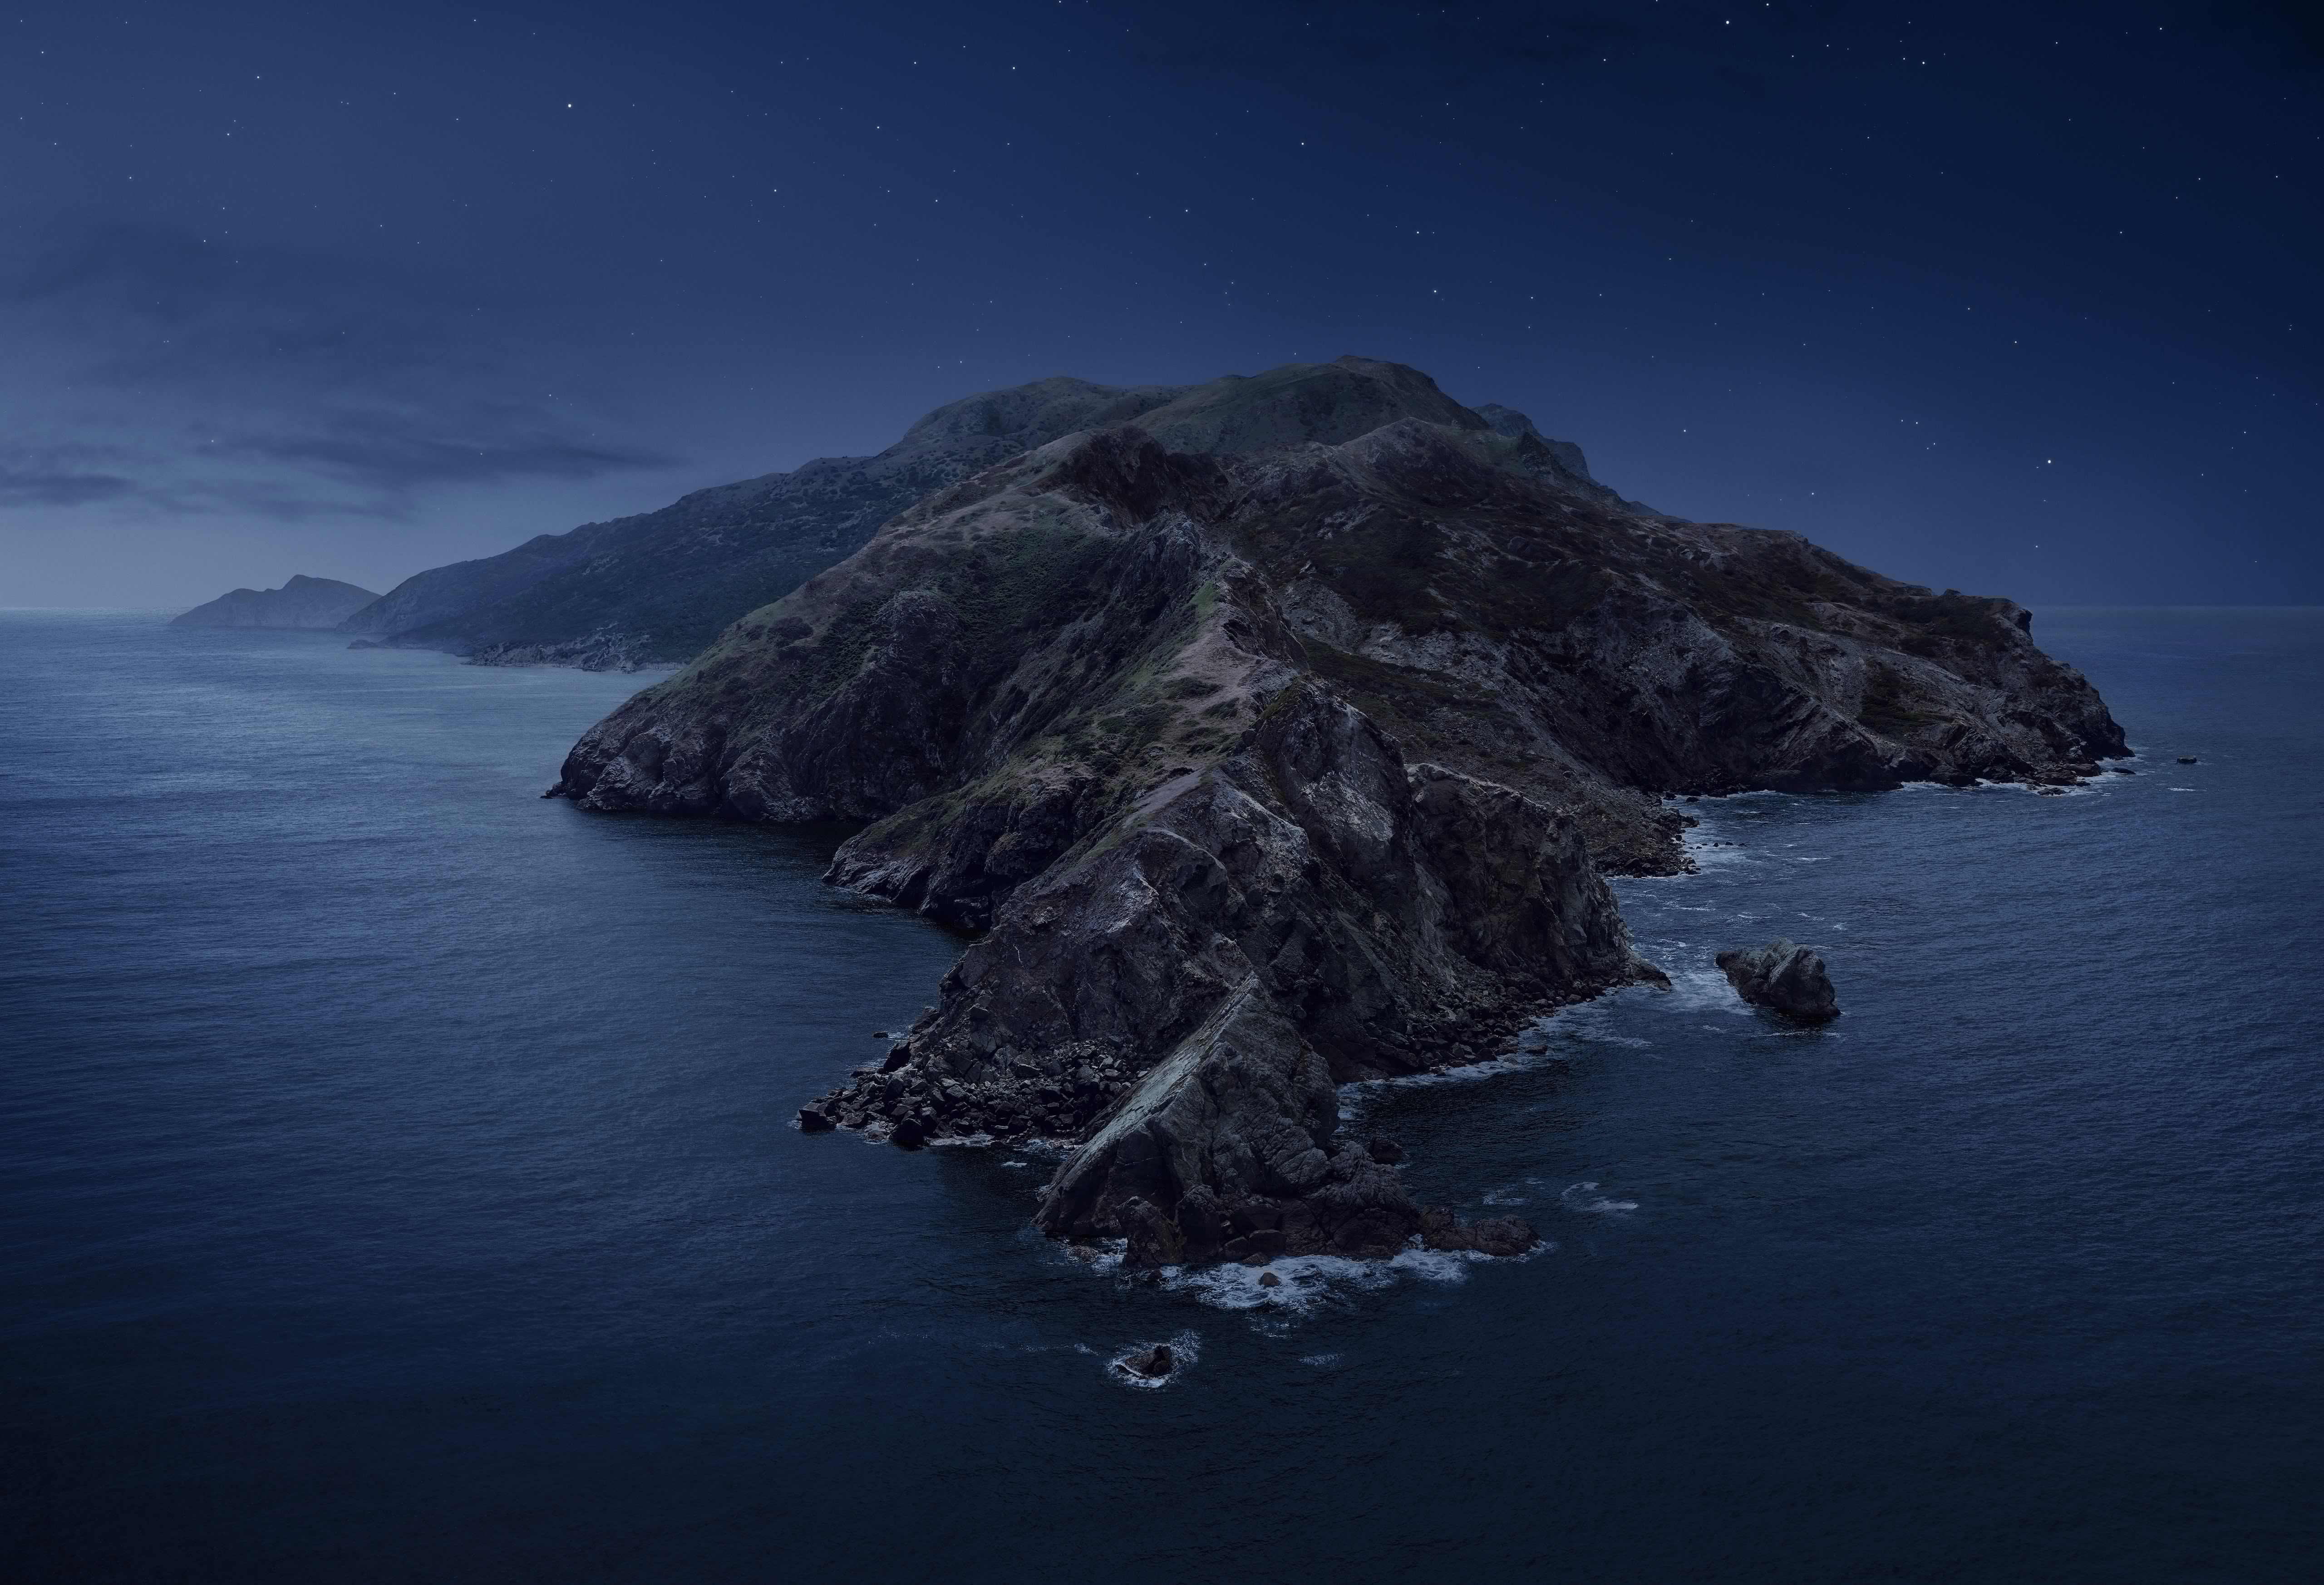 Get the New macOS Catalina and iOS 13 Wallpapers Now!